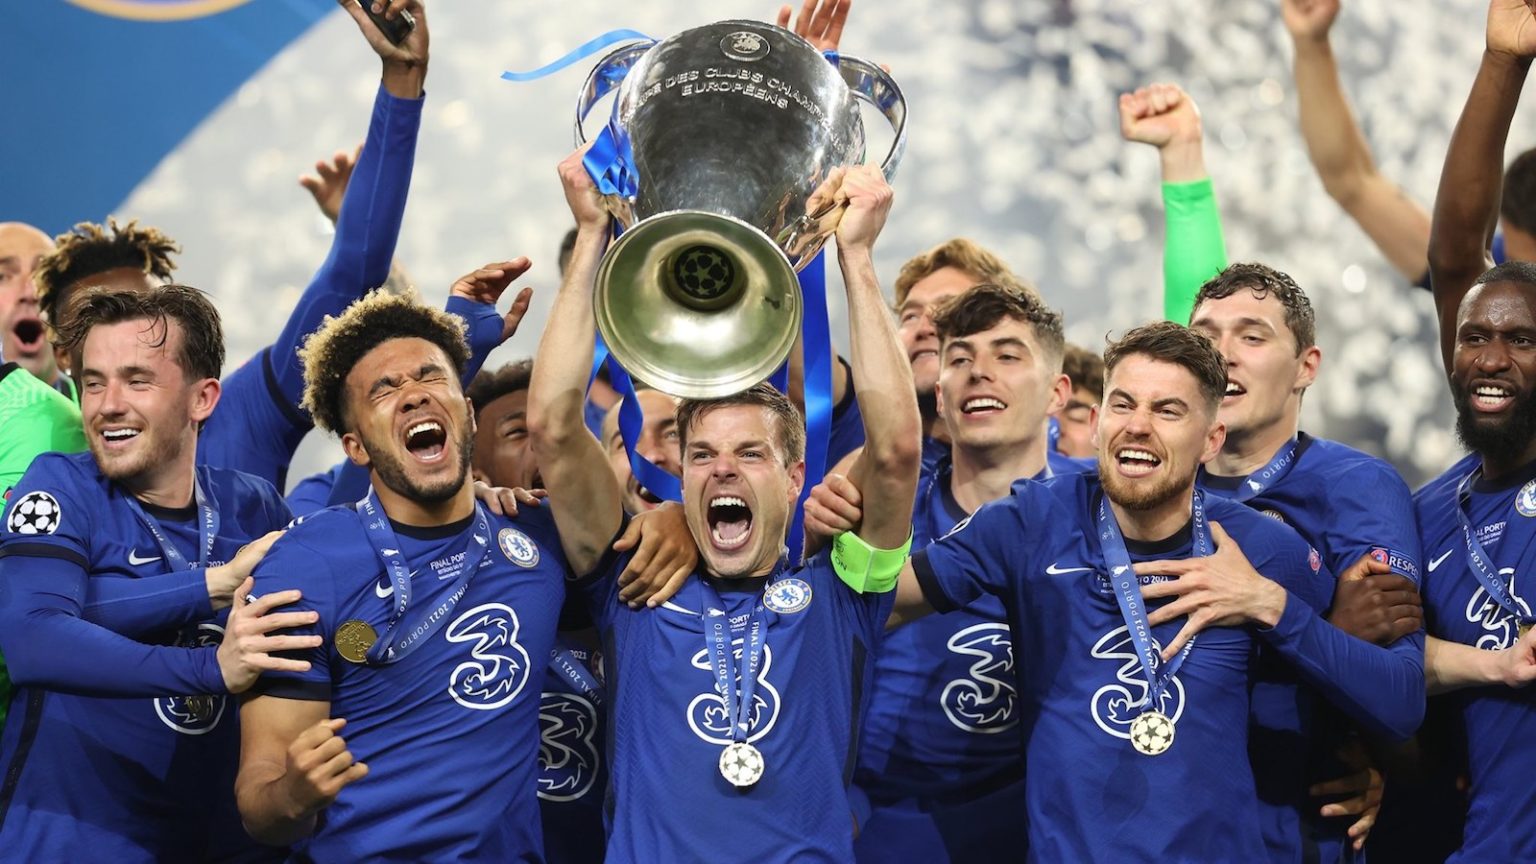 Stan Sport expands into football with UEFA Champions League rights